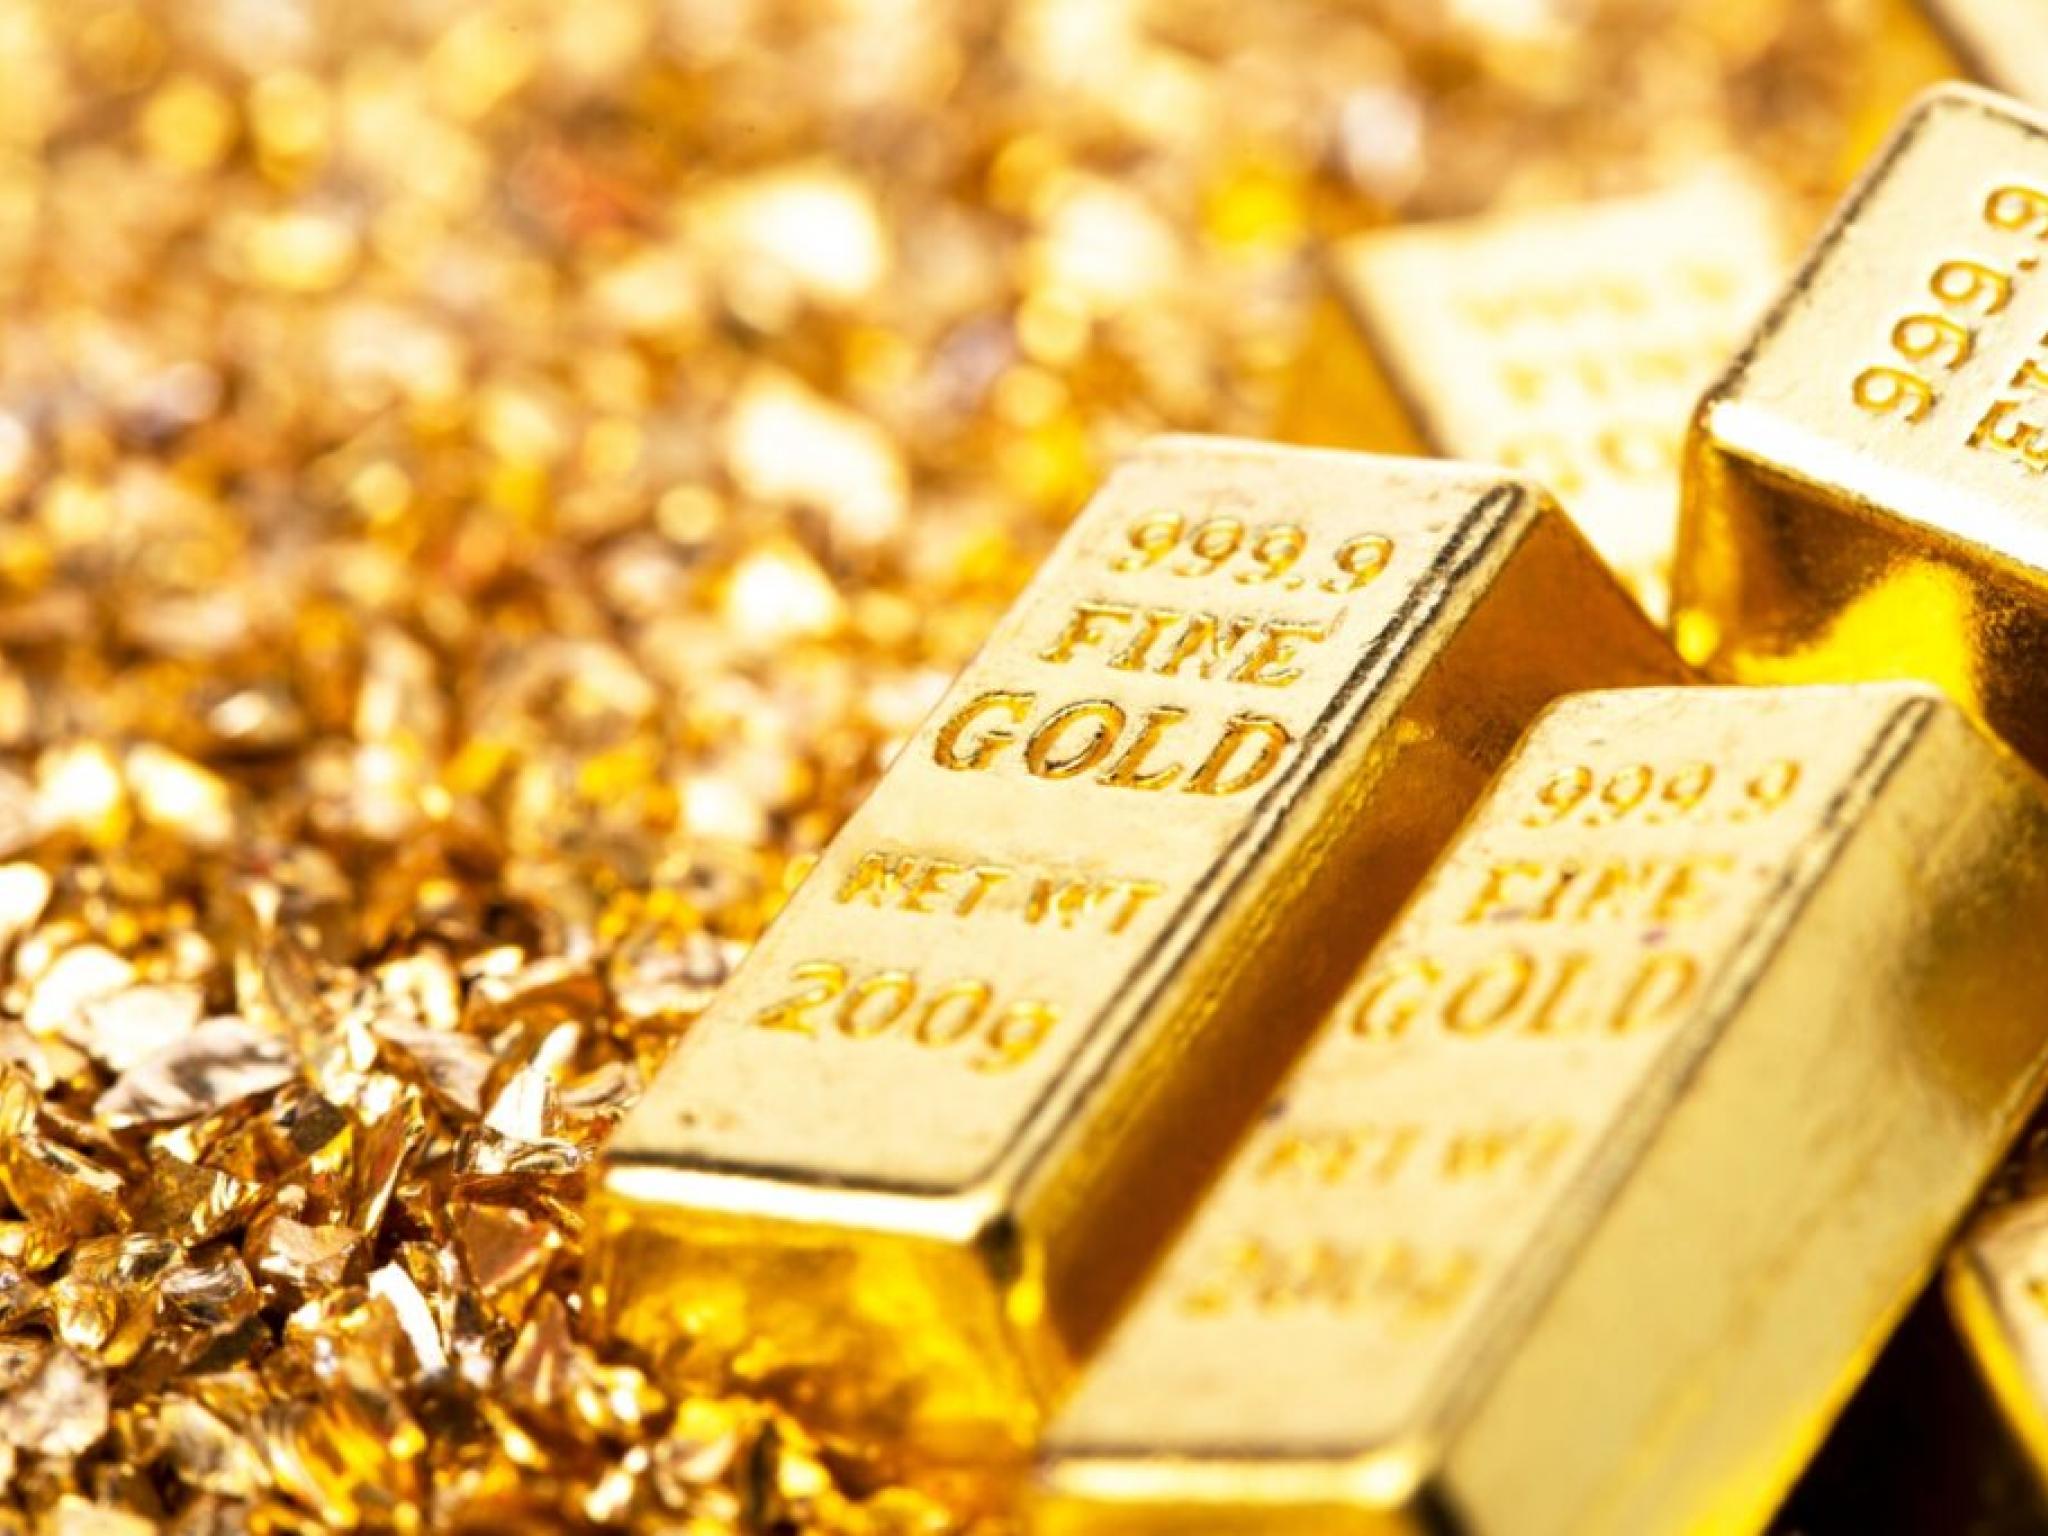  gold-gains-1-best-buy-posts-upbeat-earnings 